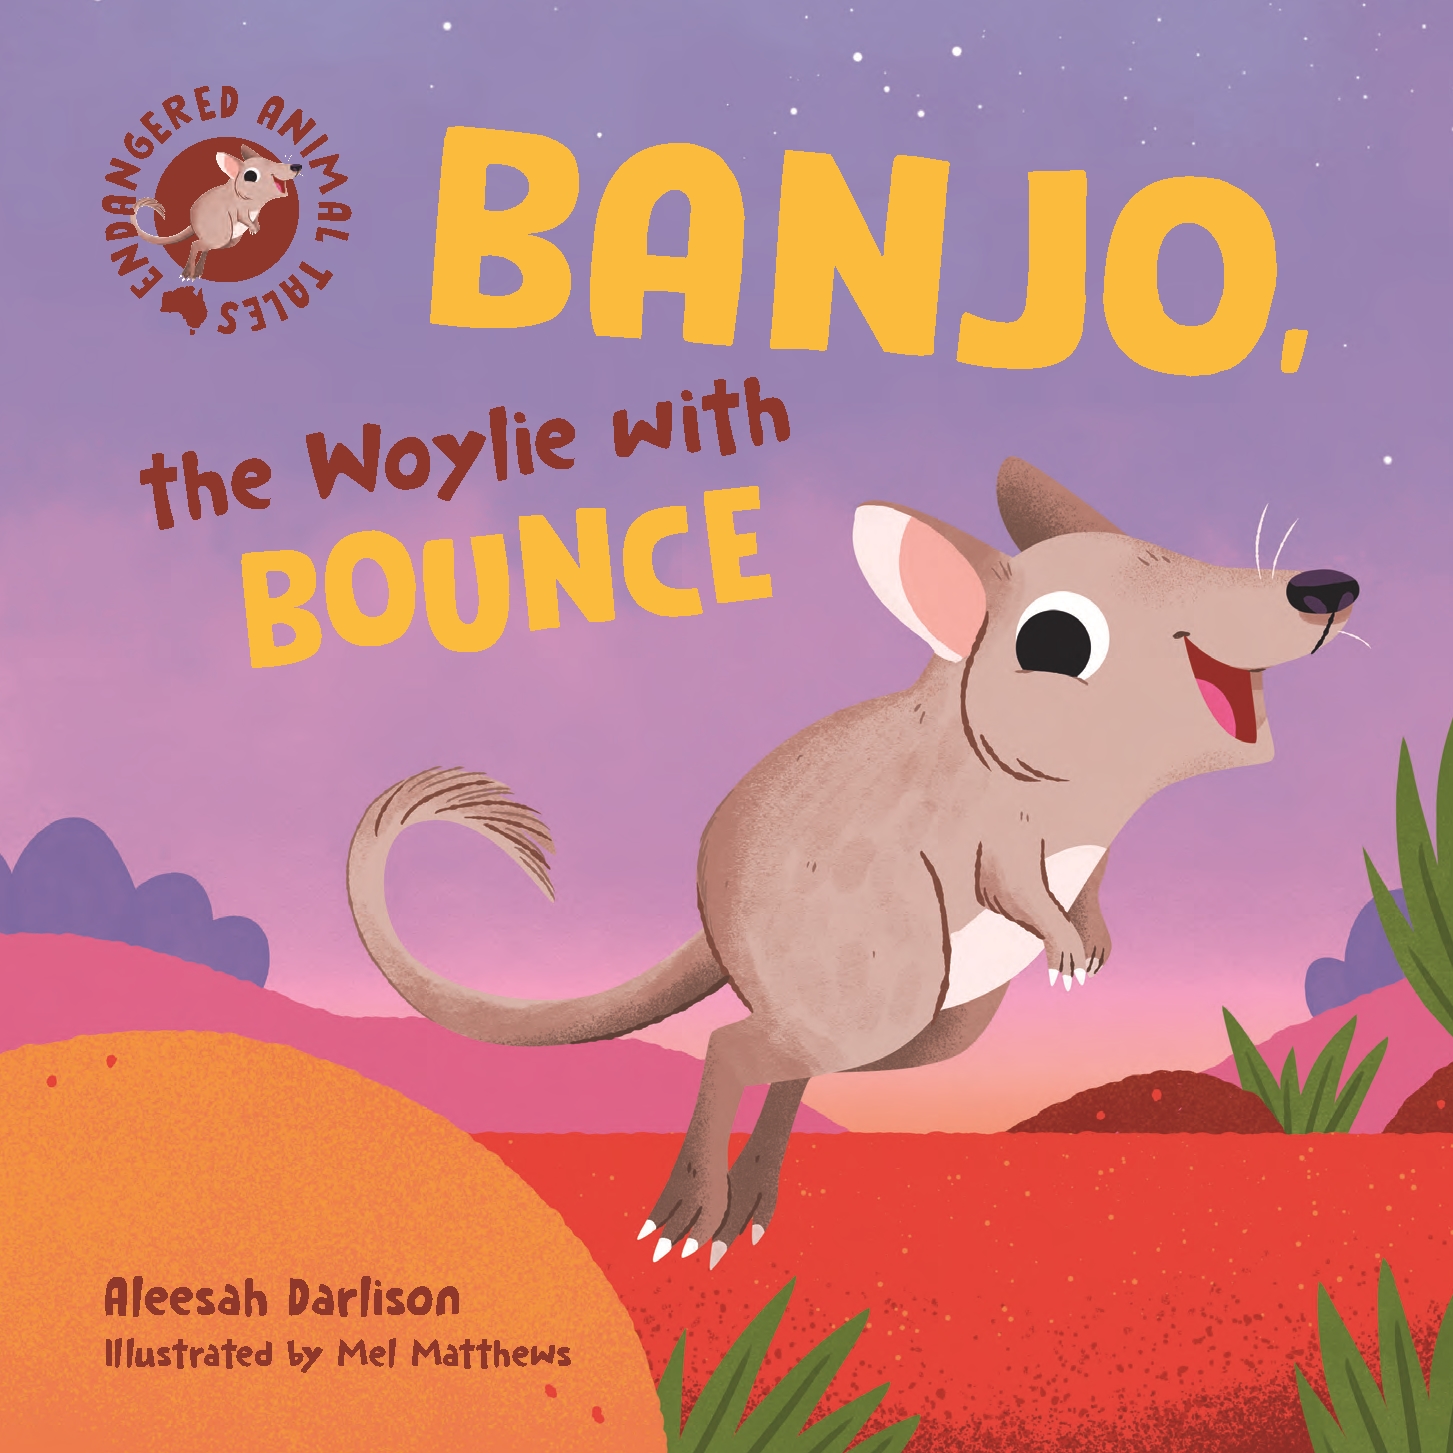 Endangered Animal Tales 4: Banjo, the Woylie with Bounce by